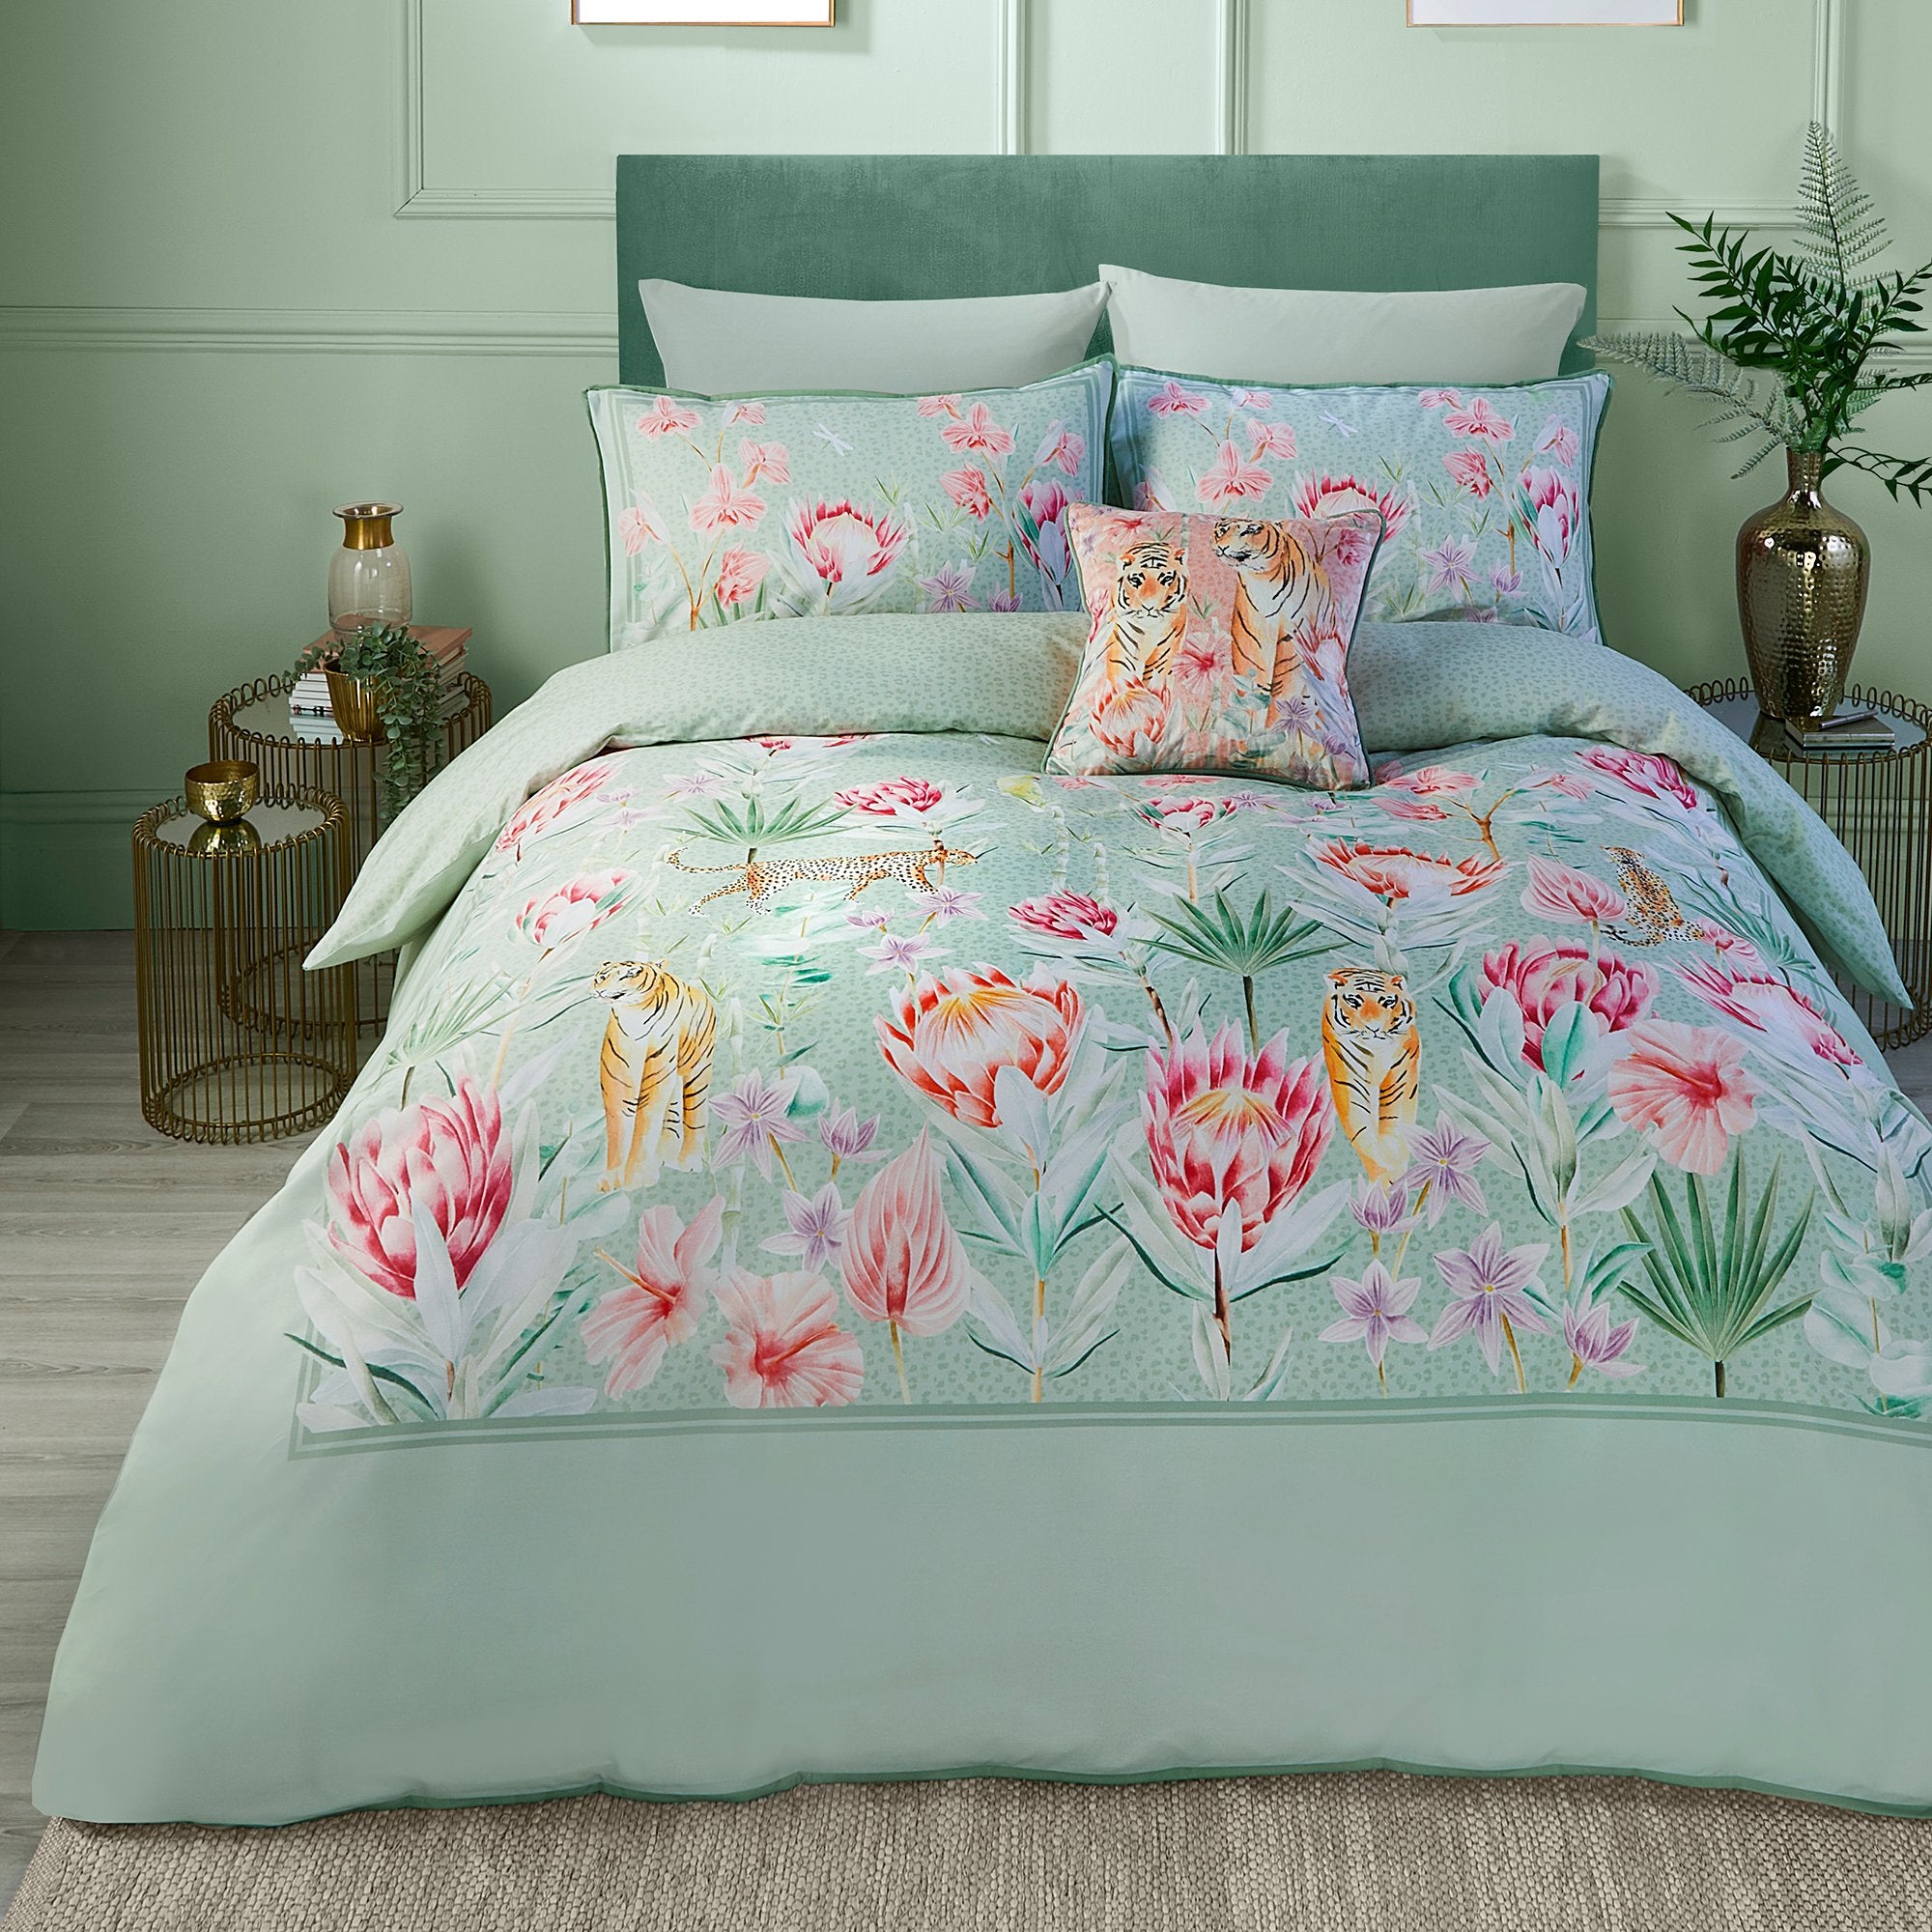 Duvet Cover Set Tropical Leopard by Soiree in Green